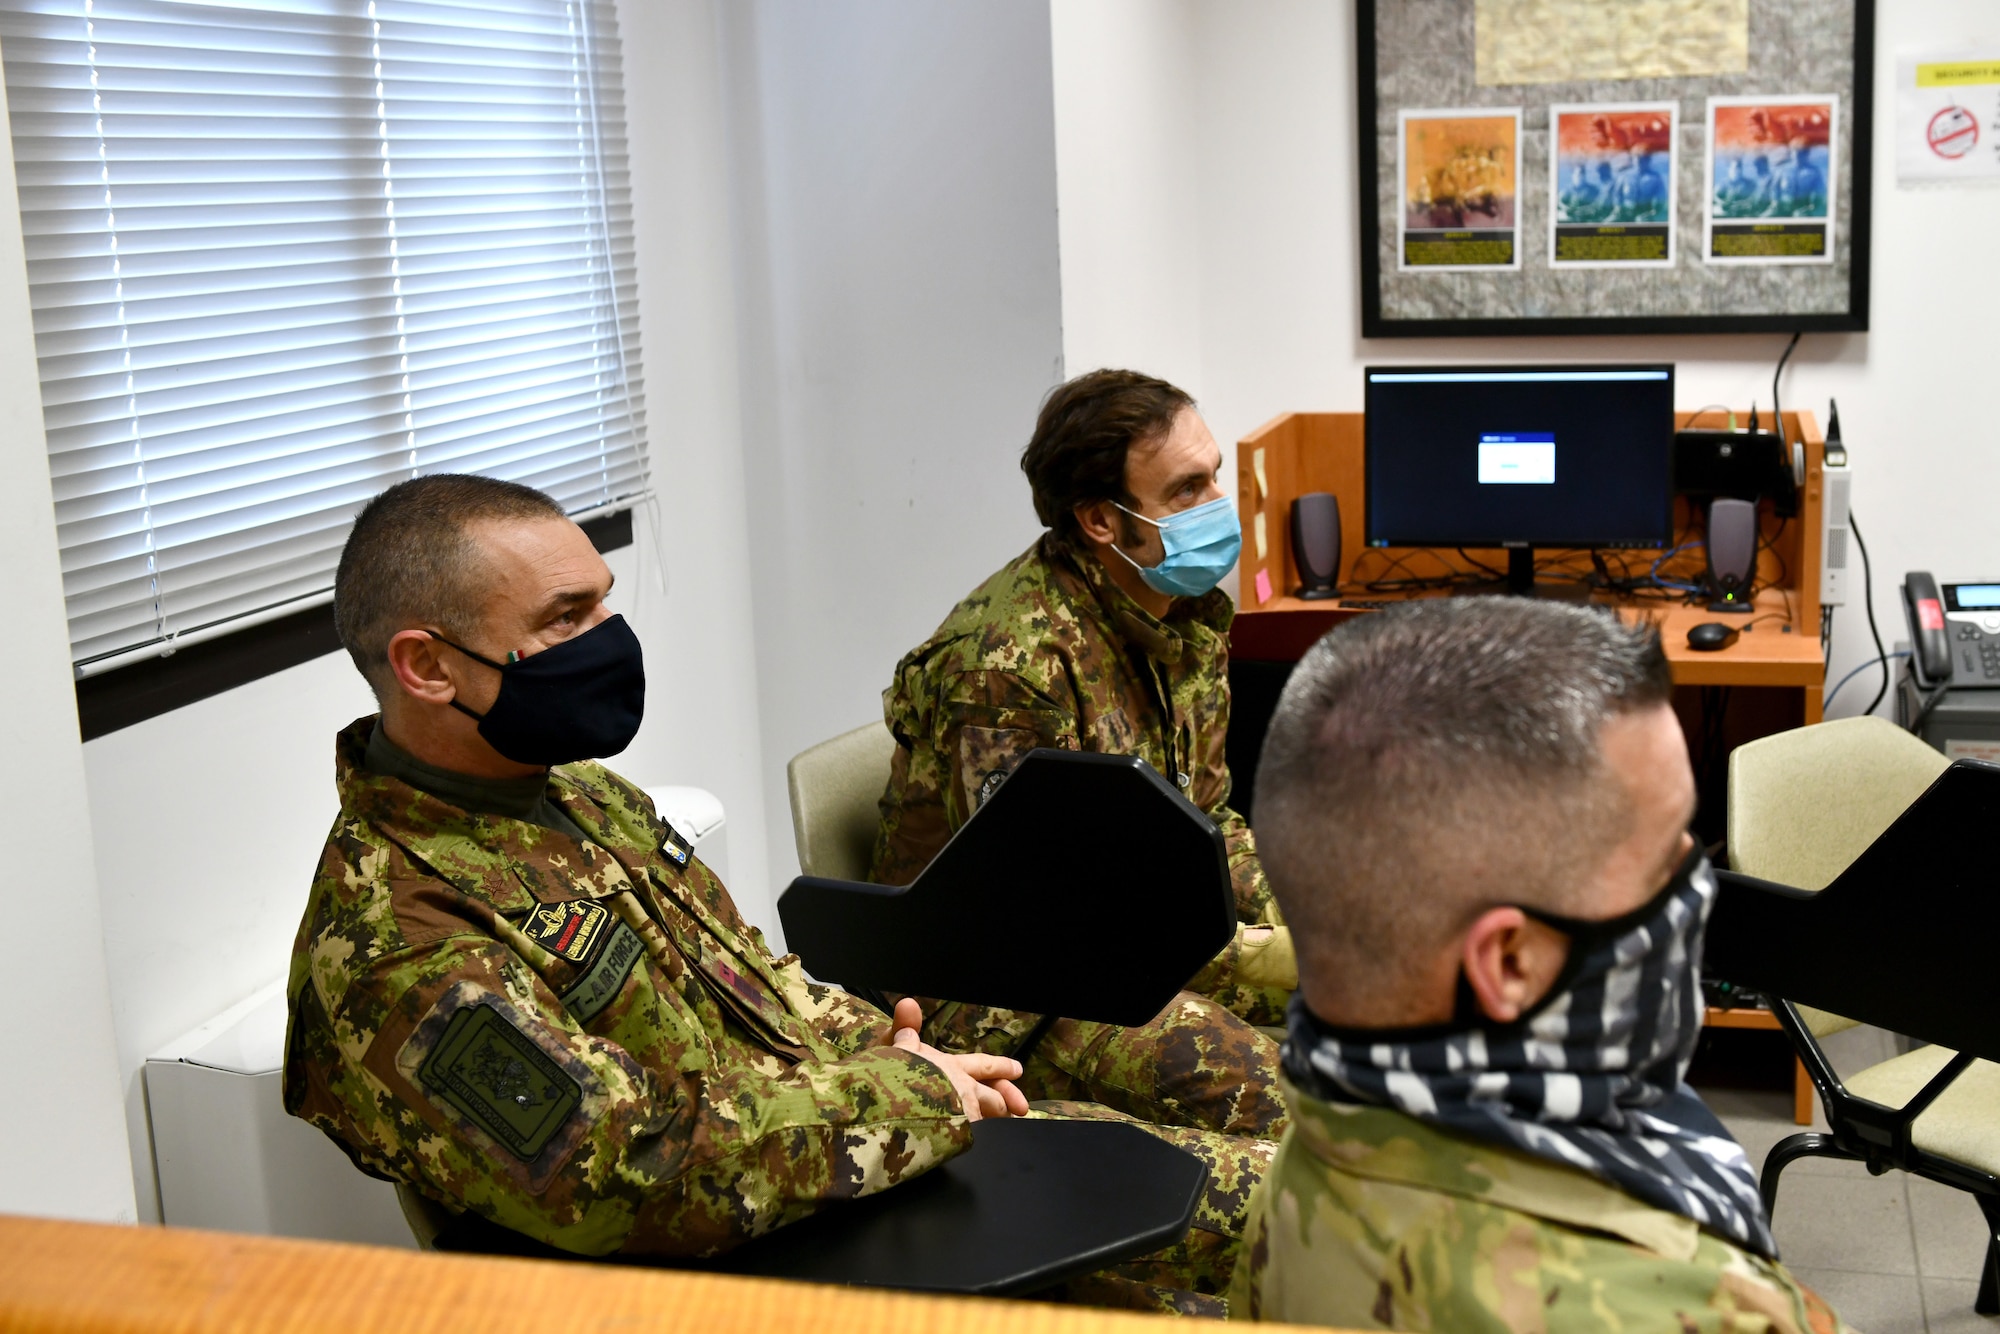 U.S. and Italian air force members attend Survival, Evasion, Resistance and Escape training at Aviano Air Base, Italy, Jan. 19, 2021. The training was created to familiarize pilots and aircrew with local conditions and dangers, such as venomous snakes or altitude sickness, as well as emergency response and personnel recovery procedures. (U.S. Air Force photo by Staff Sgt. K. Tucker Owen)